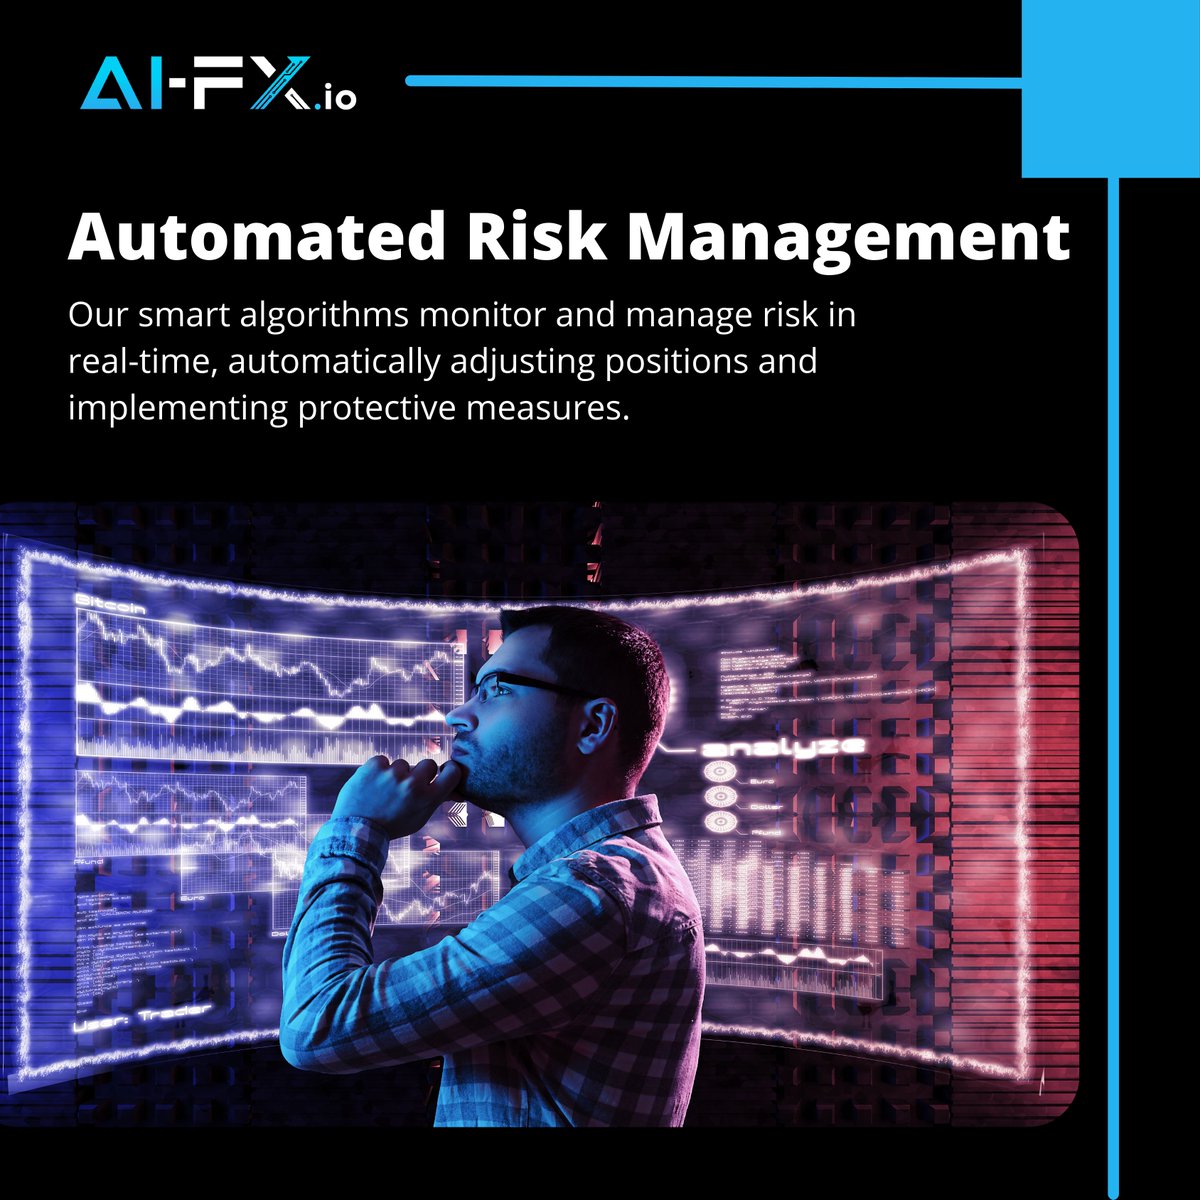 🚀📊 Automated Risk Management at its finest! Our smart algorithms monitor risk in real-time, making automatic adjustments to keep your investments secure. 💼💡 #RiskManagement #AutomatedSolutions #SmartAlgorithms #RealTimeMonitoring #ProtectiveMeasures #InvestmentSecurity